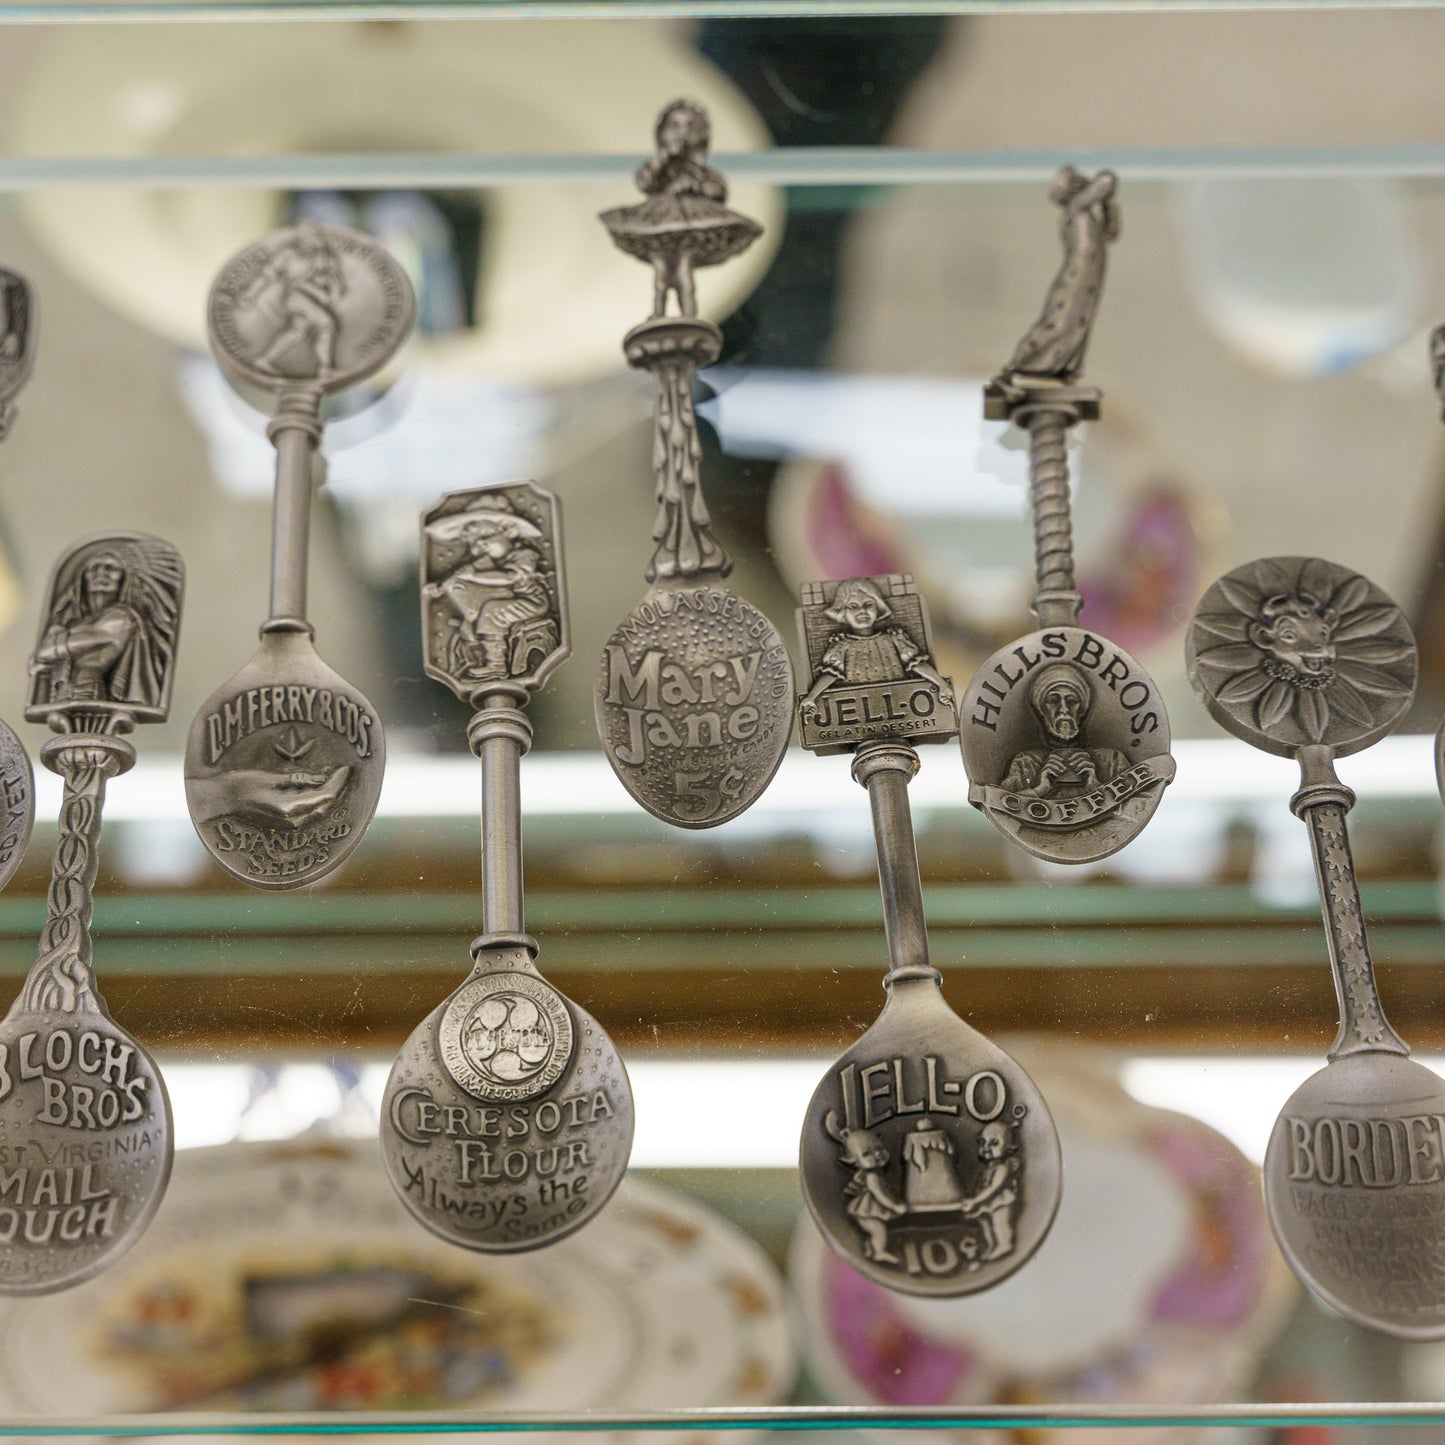 Set of 25 Franklin Mint Pewter Advertising Spoons